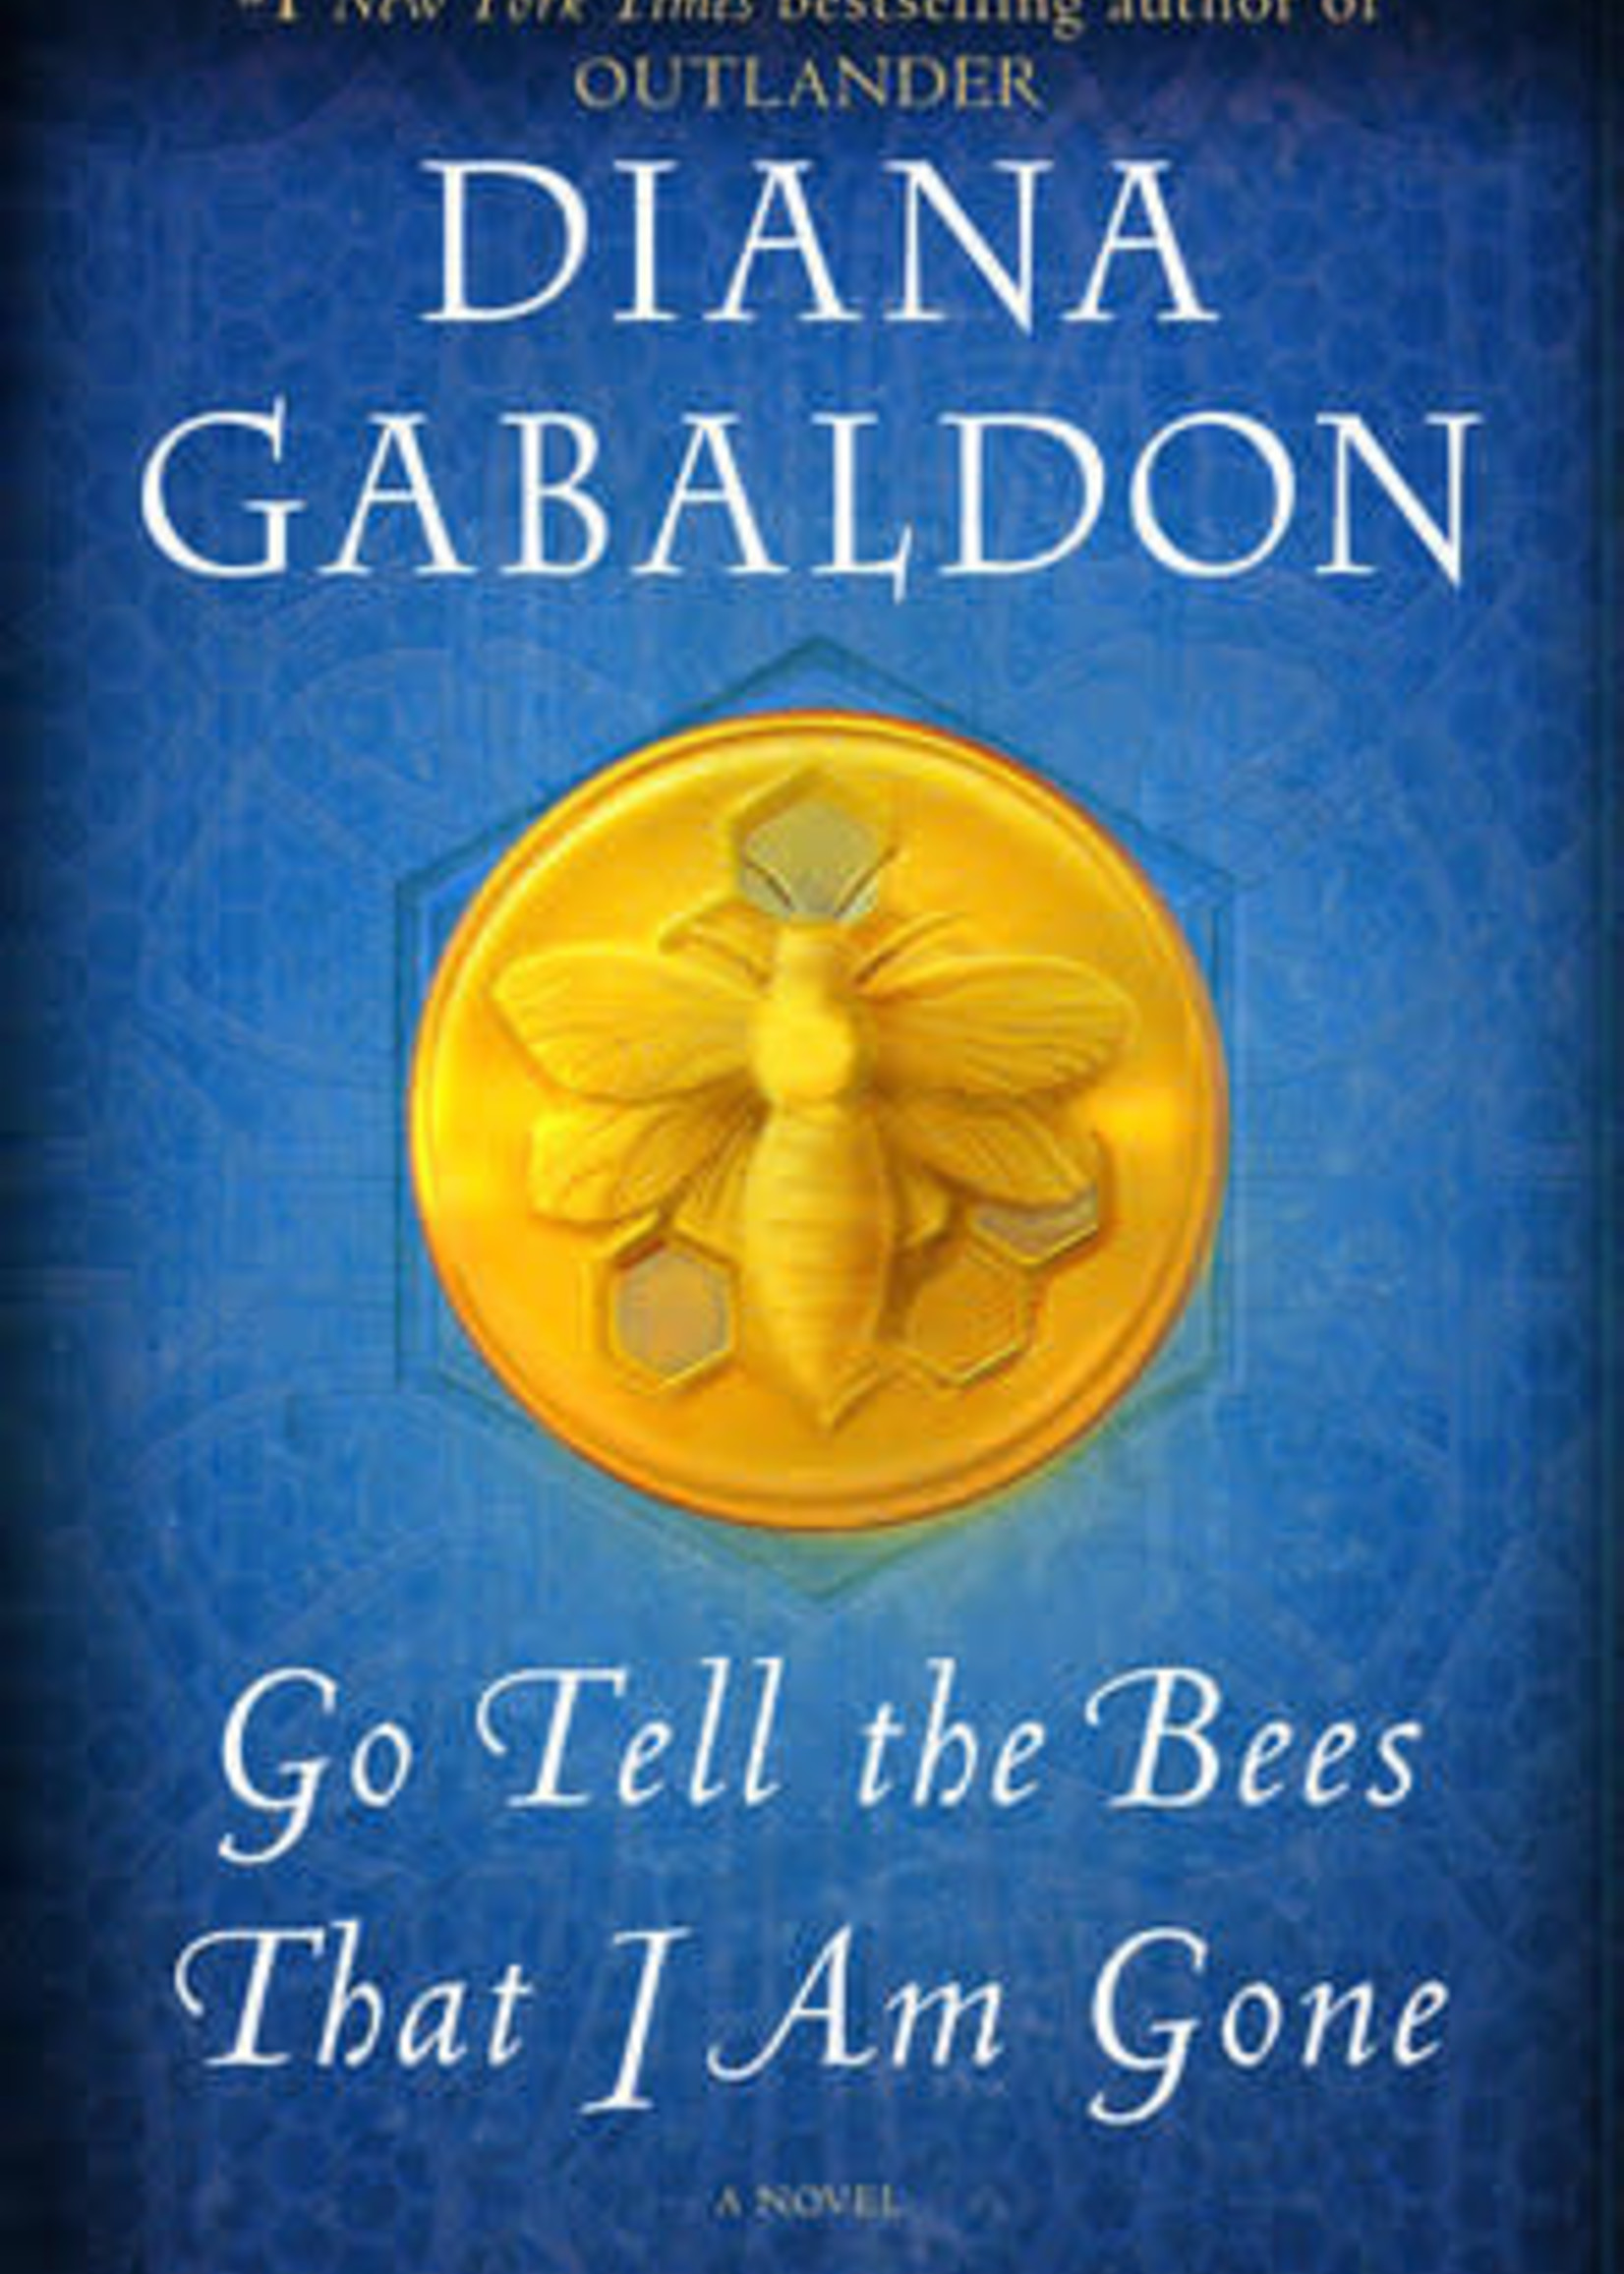 Go Tell the Bees That I Am Gone (Outlander #9) by Diana Gabaldon